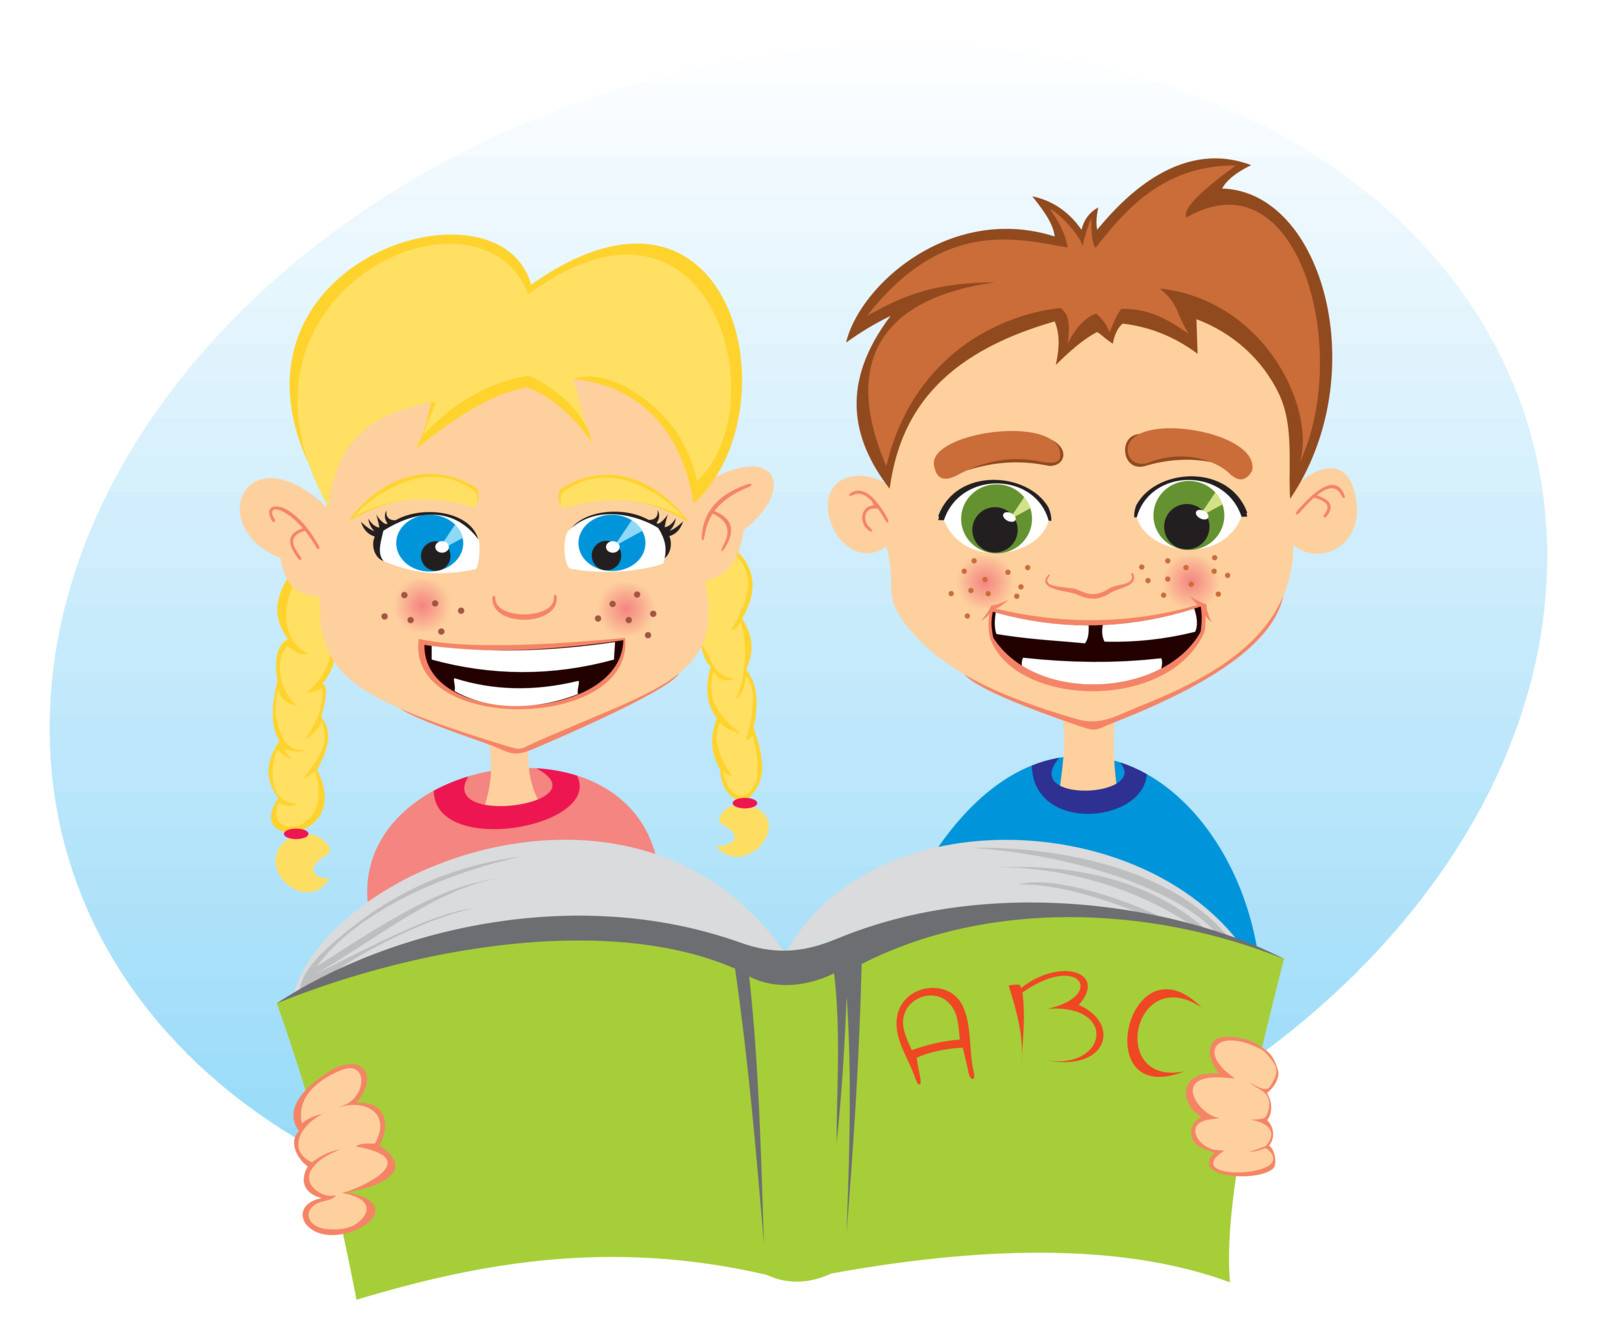 Boy and girl reading together from one book